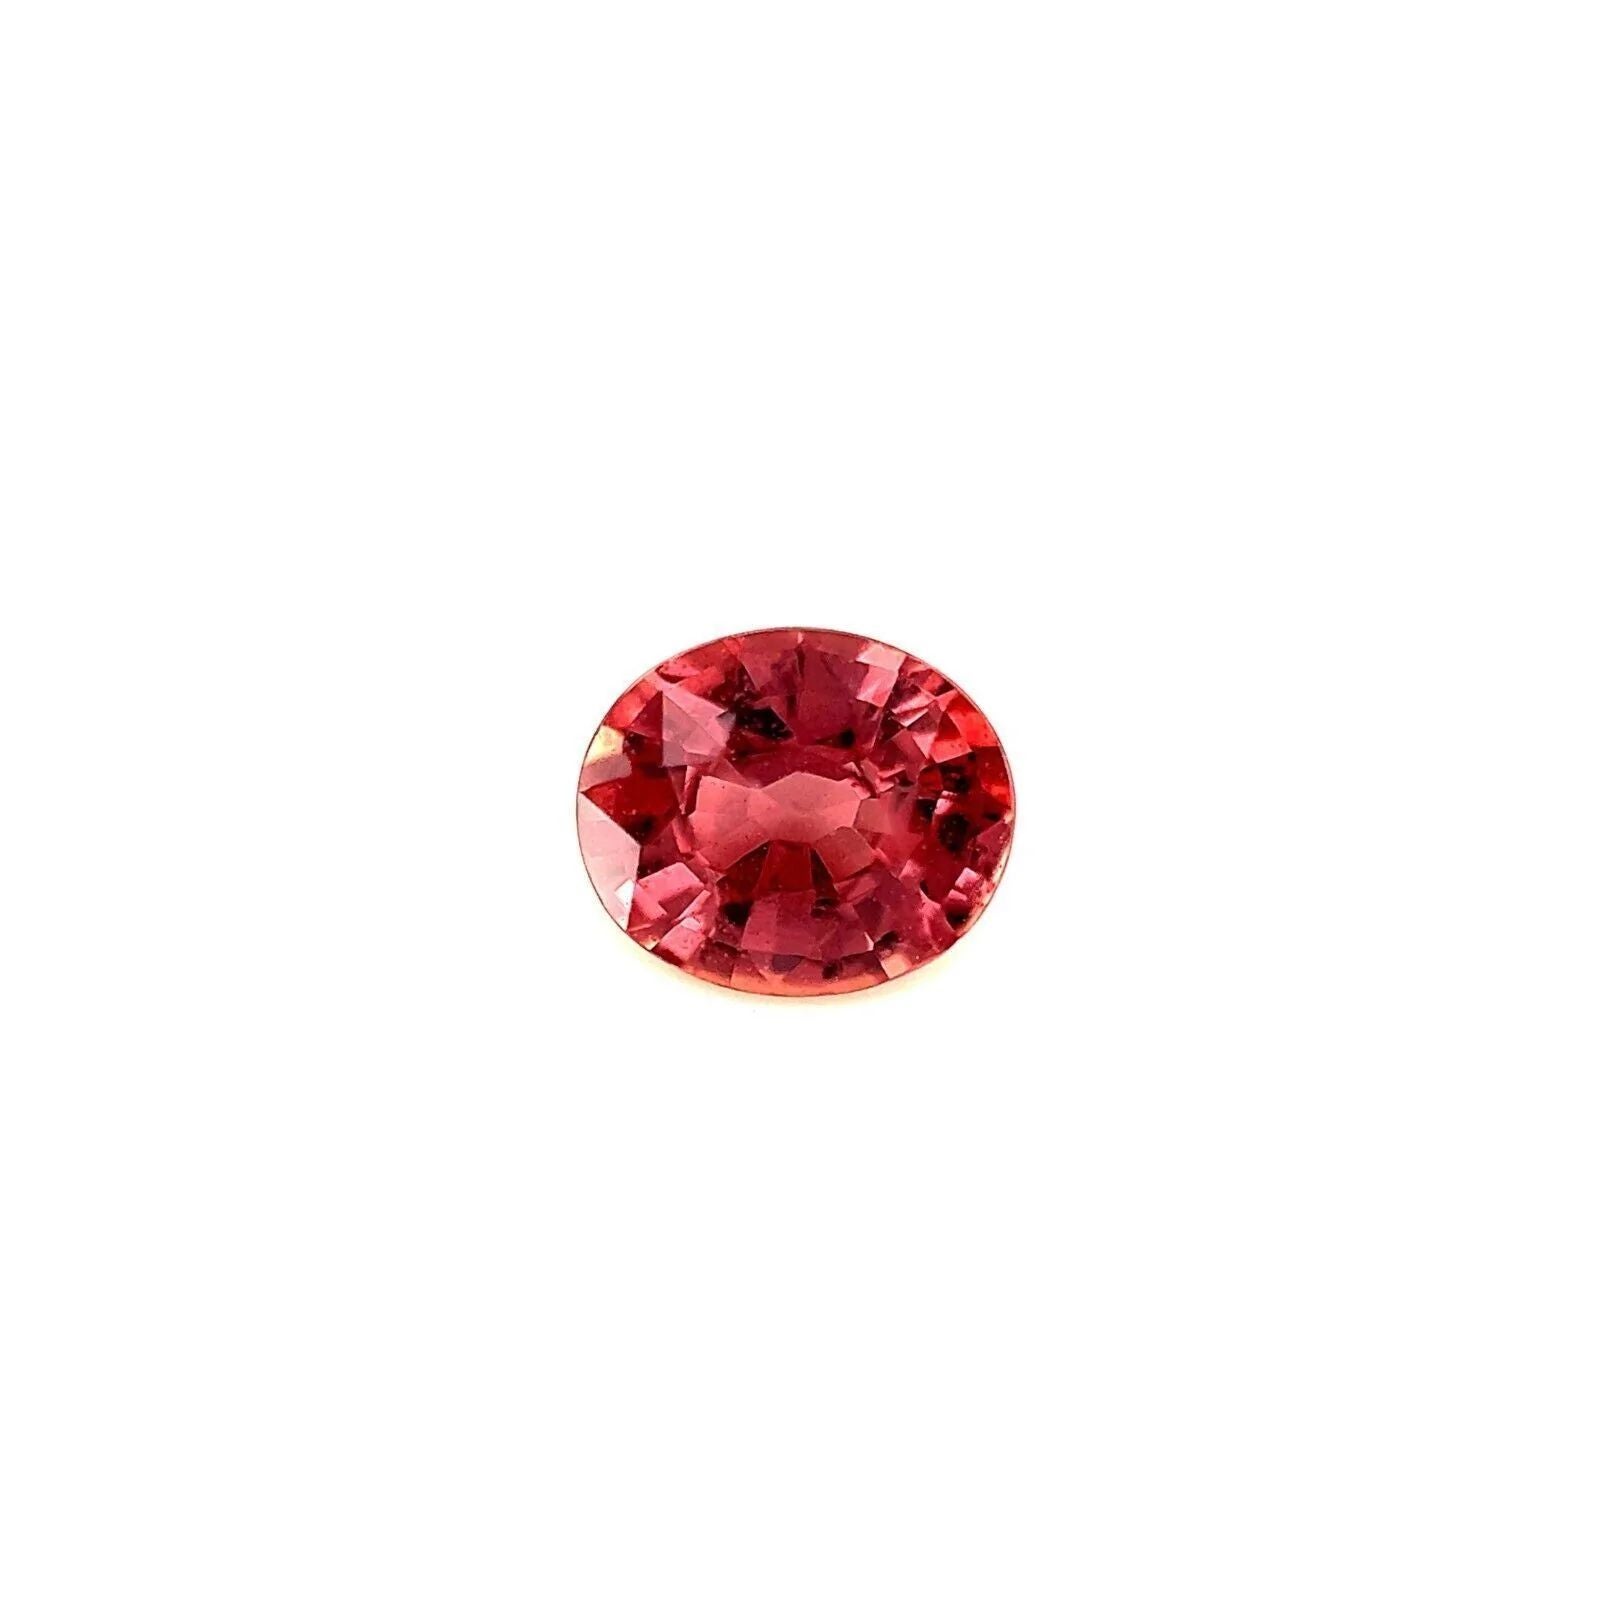 GIA Certified Unique Orange Pink Unheated Sapphire 0.75ct Oval Cut Gem No Heat For Sale